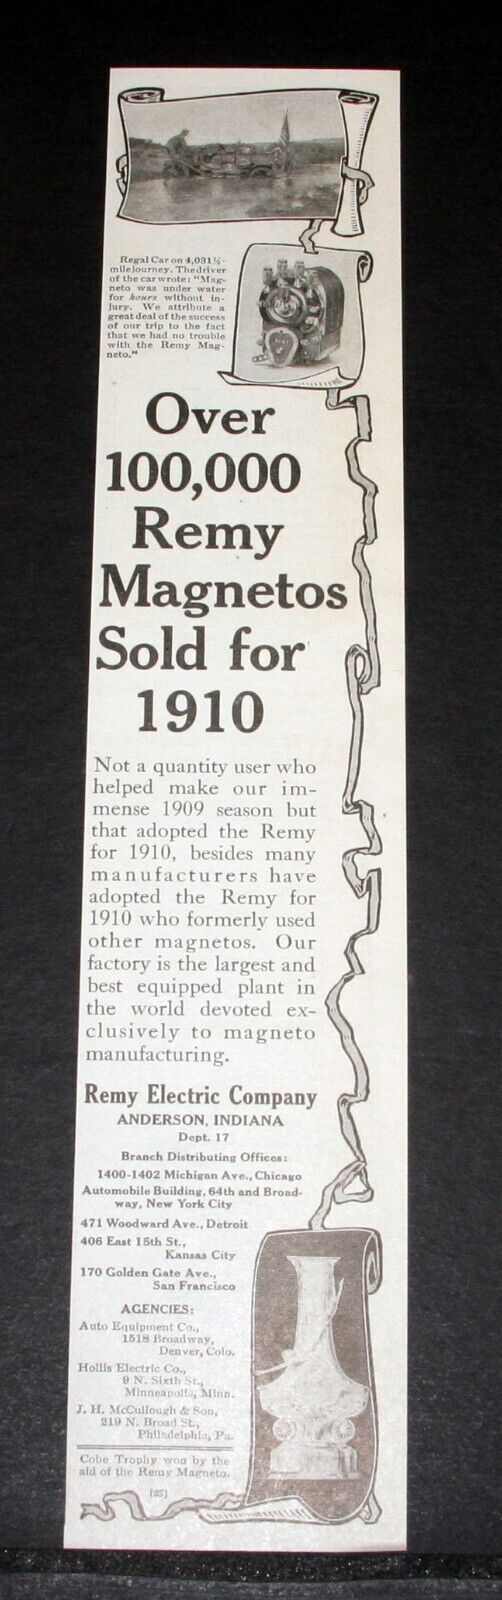 1910 OLD MAGAZINE PRINT AD, REMY ELECTRIC, OVER 100,000 MAGNETOS SOLD IN 1910